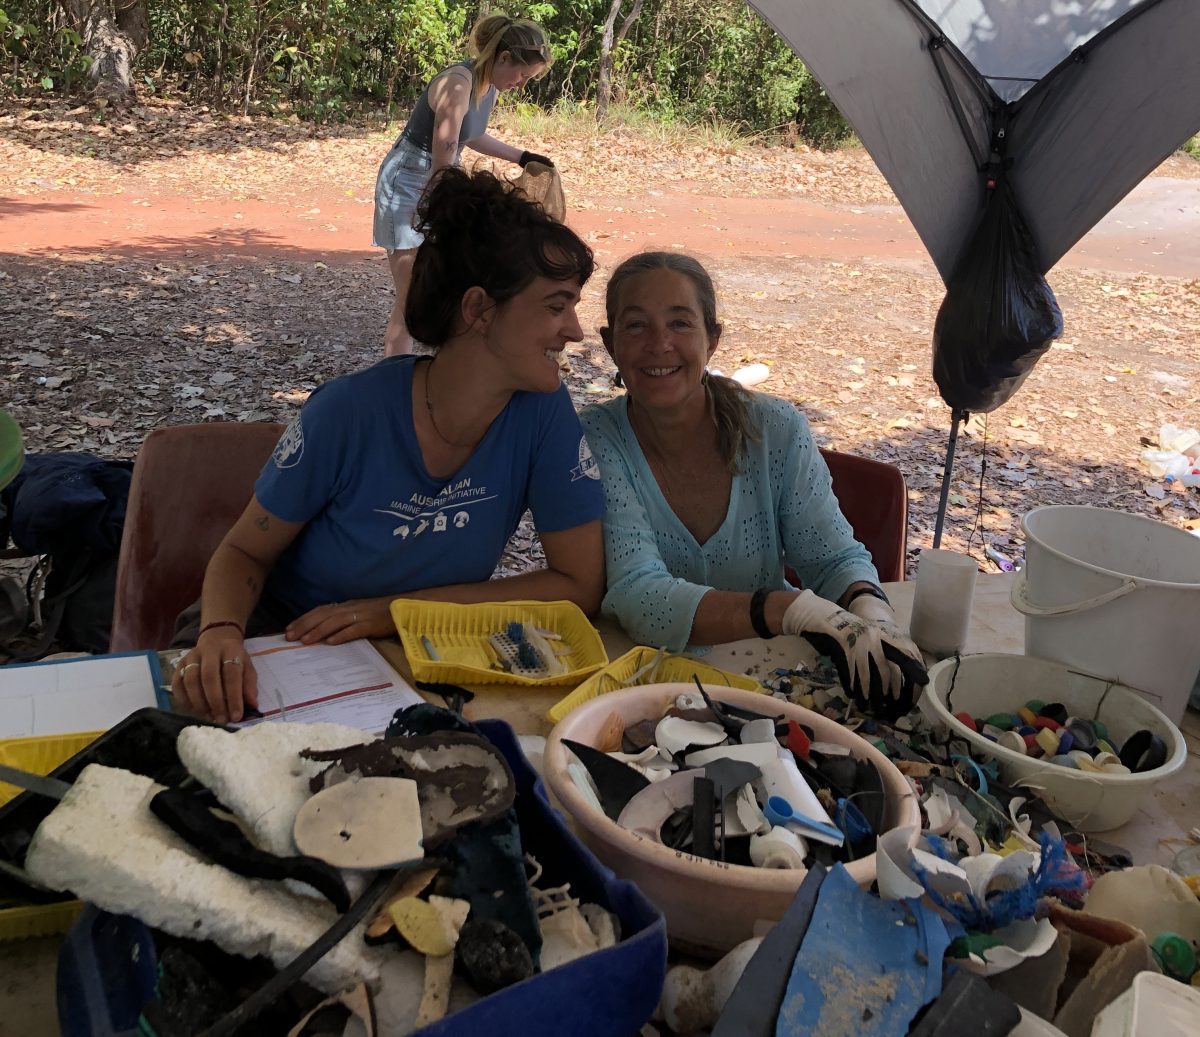 Two women are sitting at a table sorting debris found on the day.